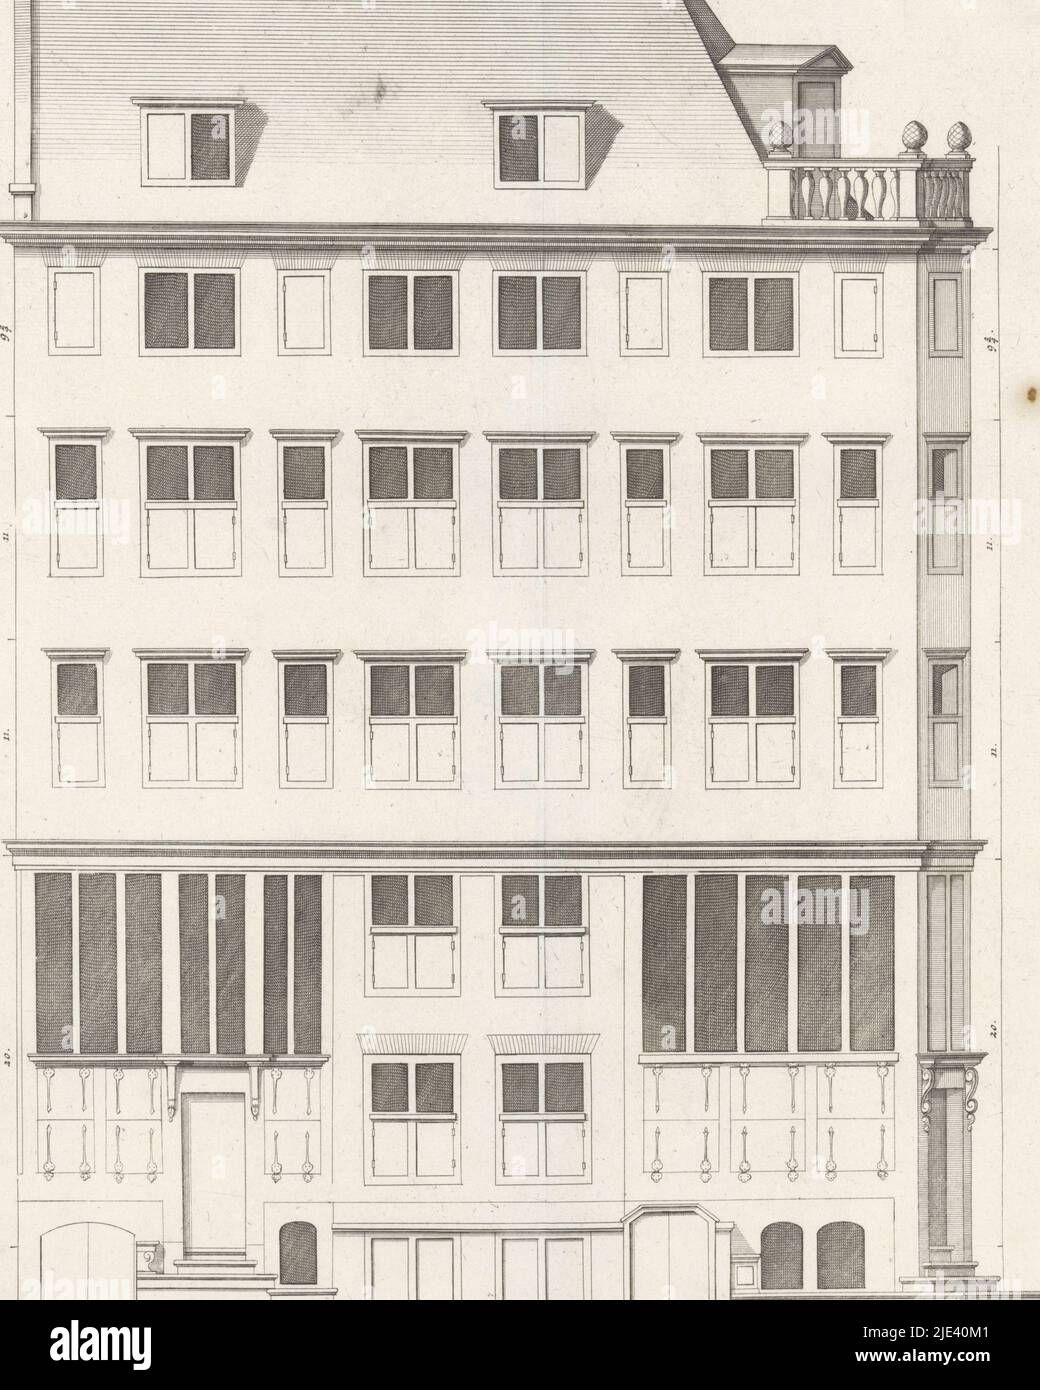 Facade of a dwelling house in Amsterdam, Bastiaen Stopendael, after Philips Vinckboons (II), 1674, Facade along the Tij(e) canal, now Prins Hendrikkade, built by order of Maarten Fransz. van der Schilde in 1649-1650. This building stood on the site of the present Shipping House. The house was designed by Philips Vingboons., print maker: Bastiaen Stopendael, (mentioned on object), Philips Vinckboons (II), (mentioned on object), Amsterdam, 1674, paper, etching, engraving, h 420 mm × w 291 mm Stock Photo